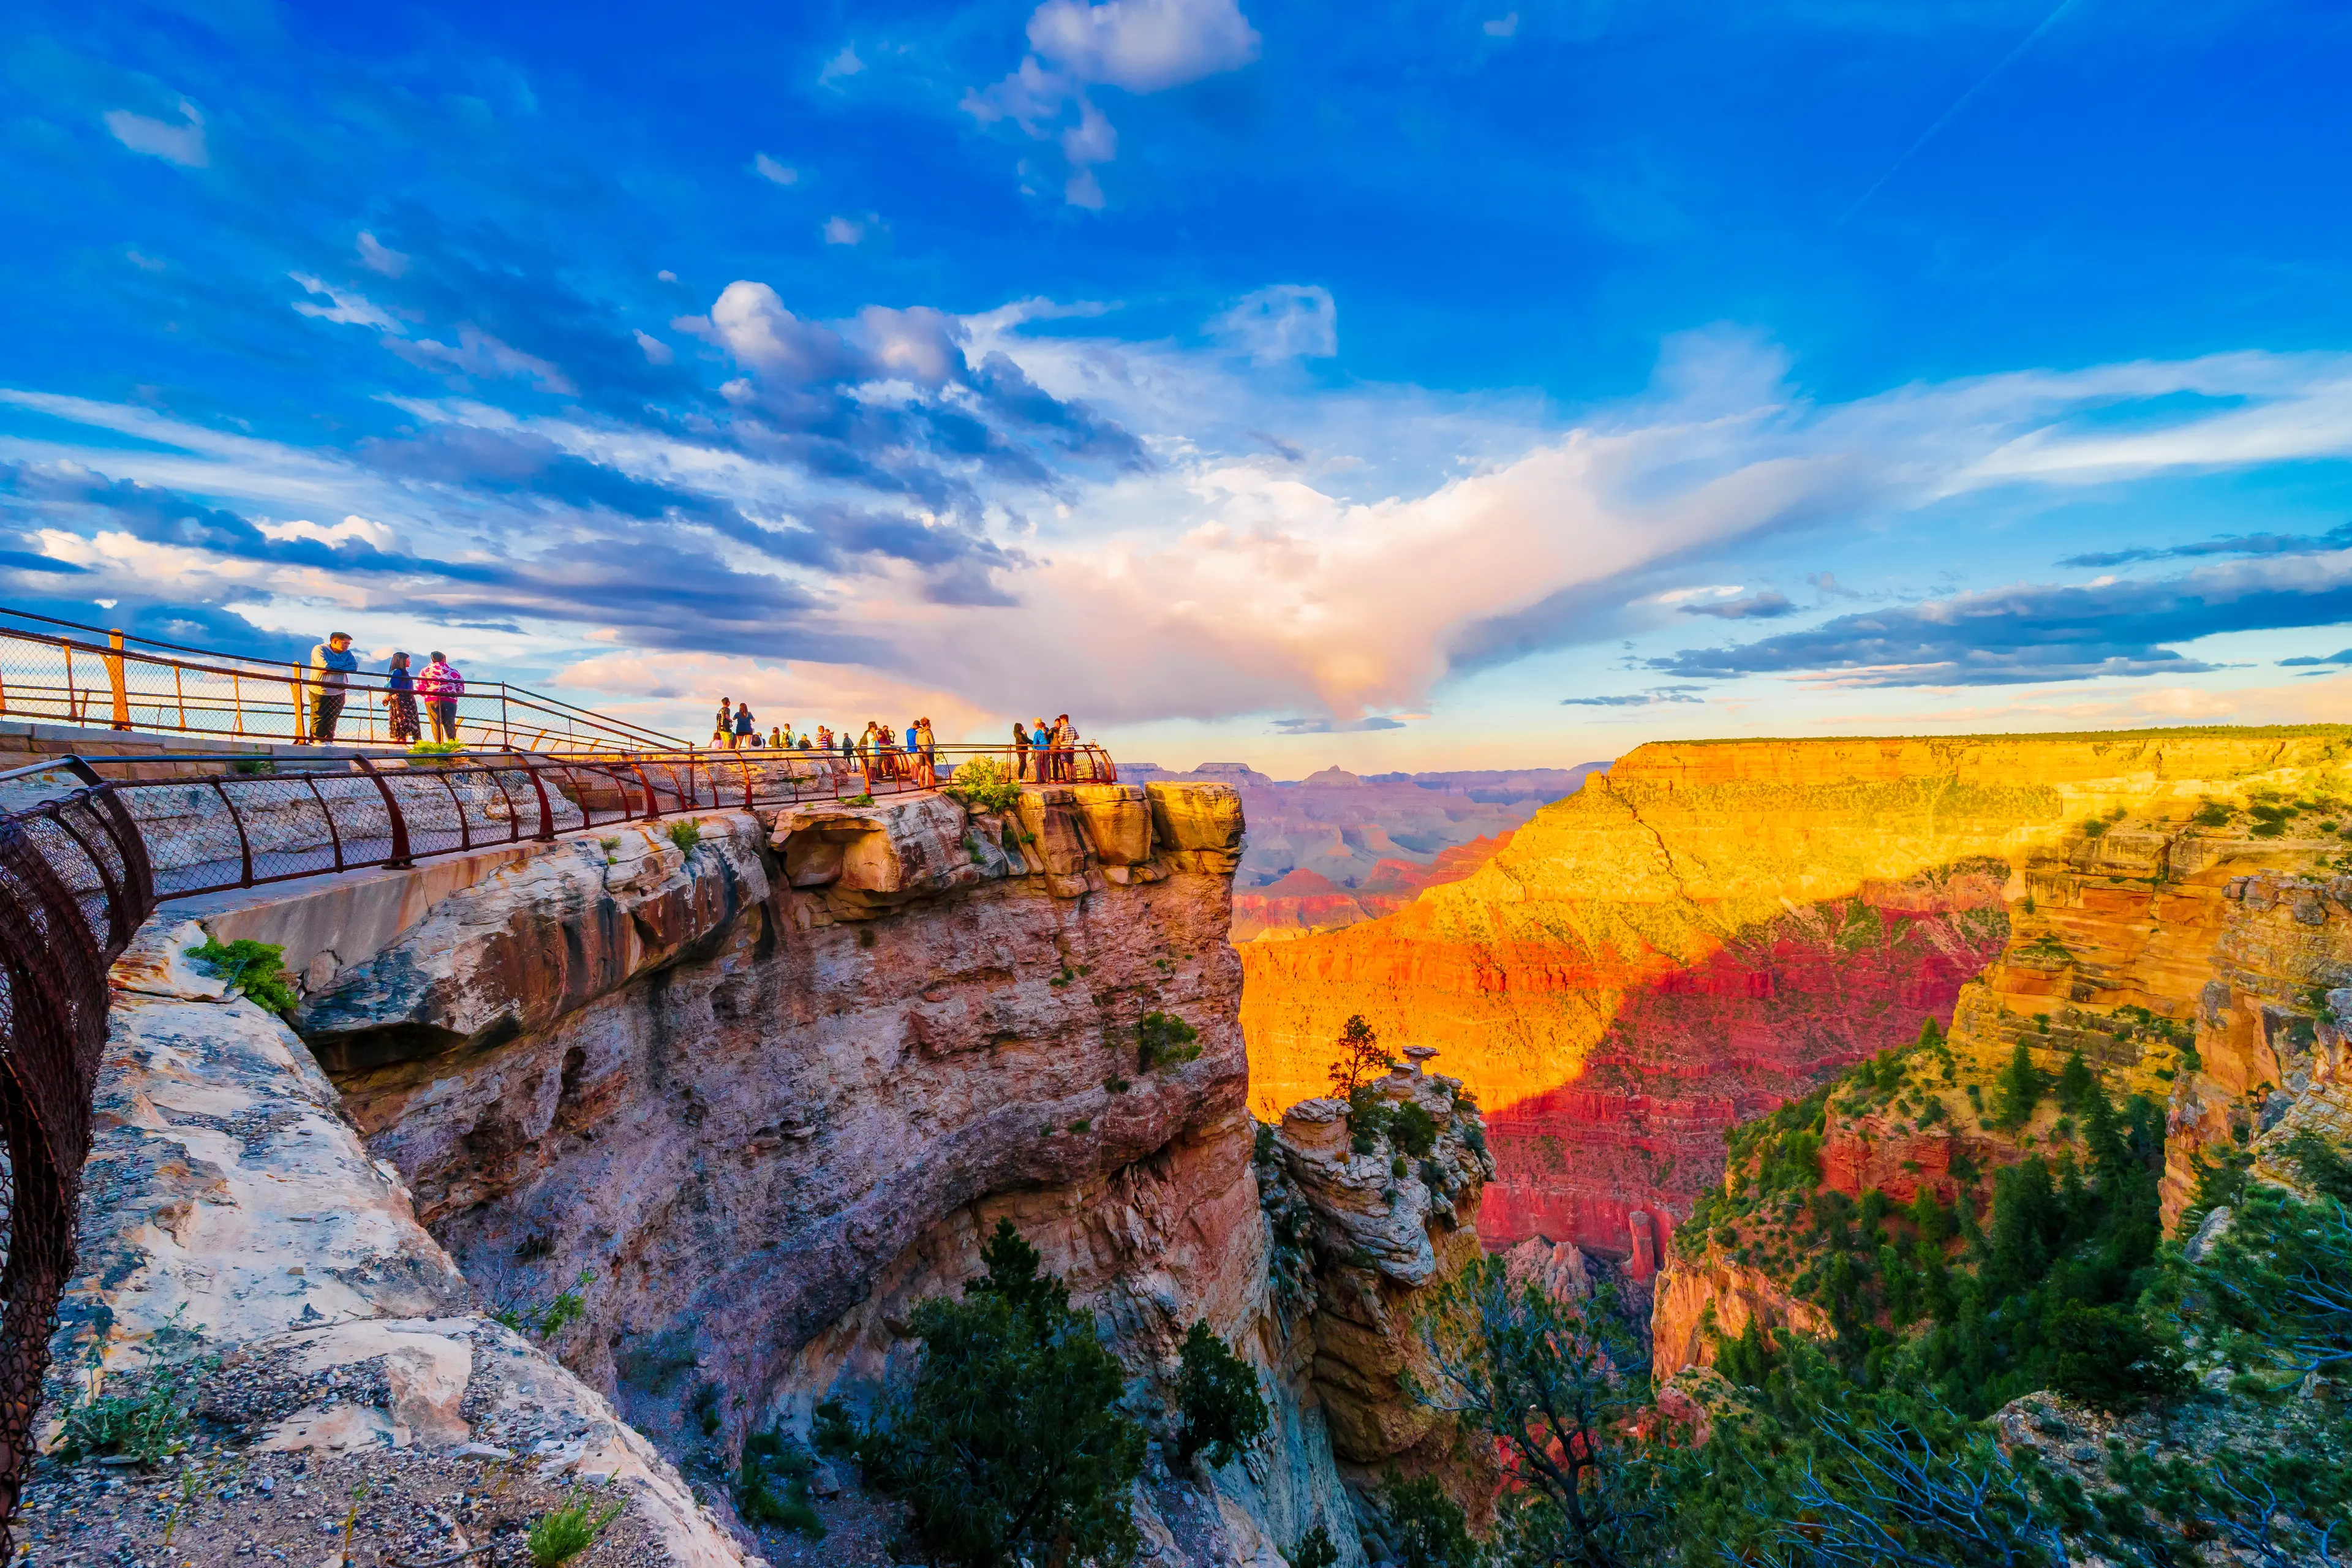 2-Day Thrilling Outdoor and Sightseeing Adventure in Grand Canyon